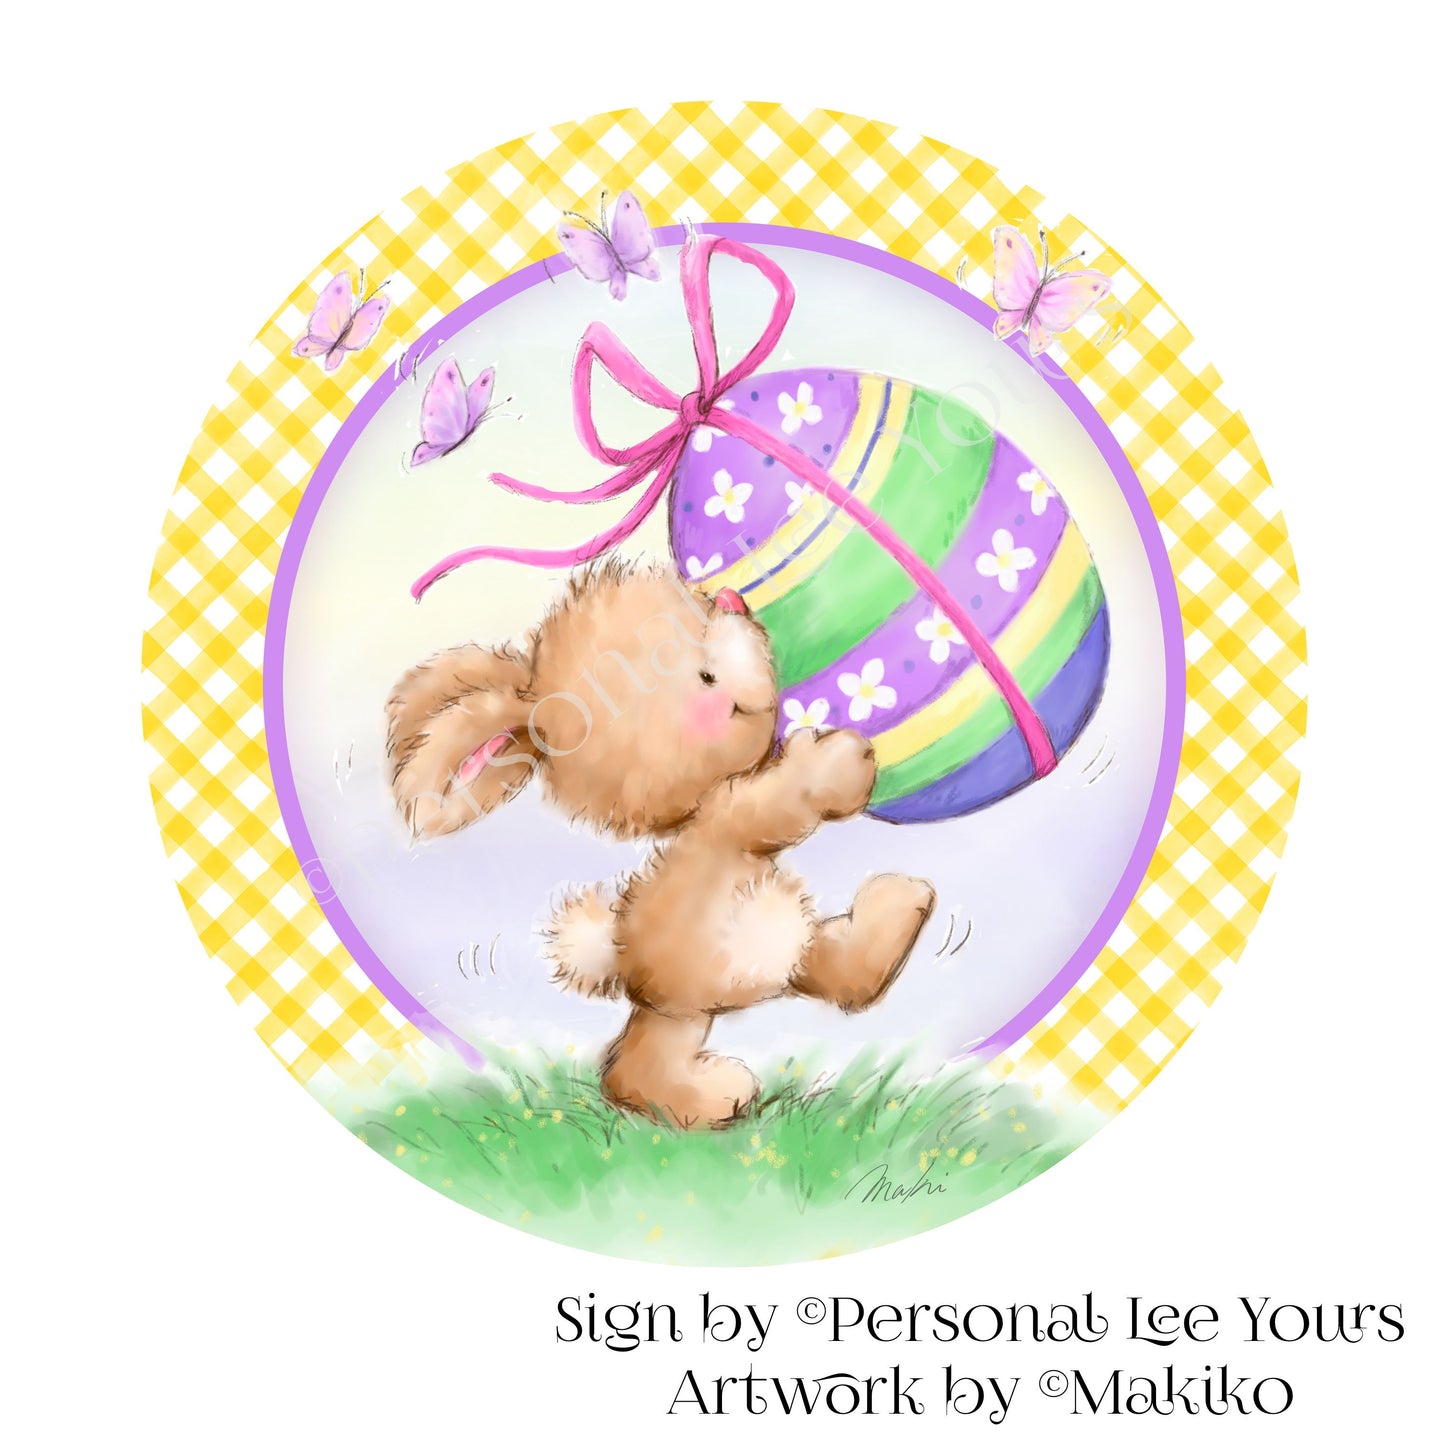 Makiko Exclusive Sign * Easter Bunny With Egg *  Round * Lightweight Metal